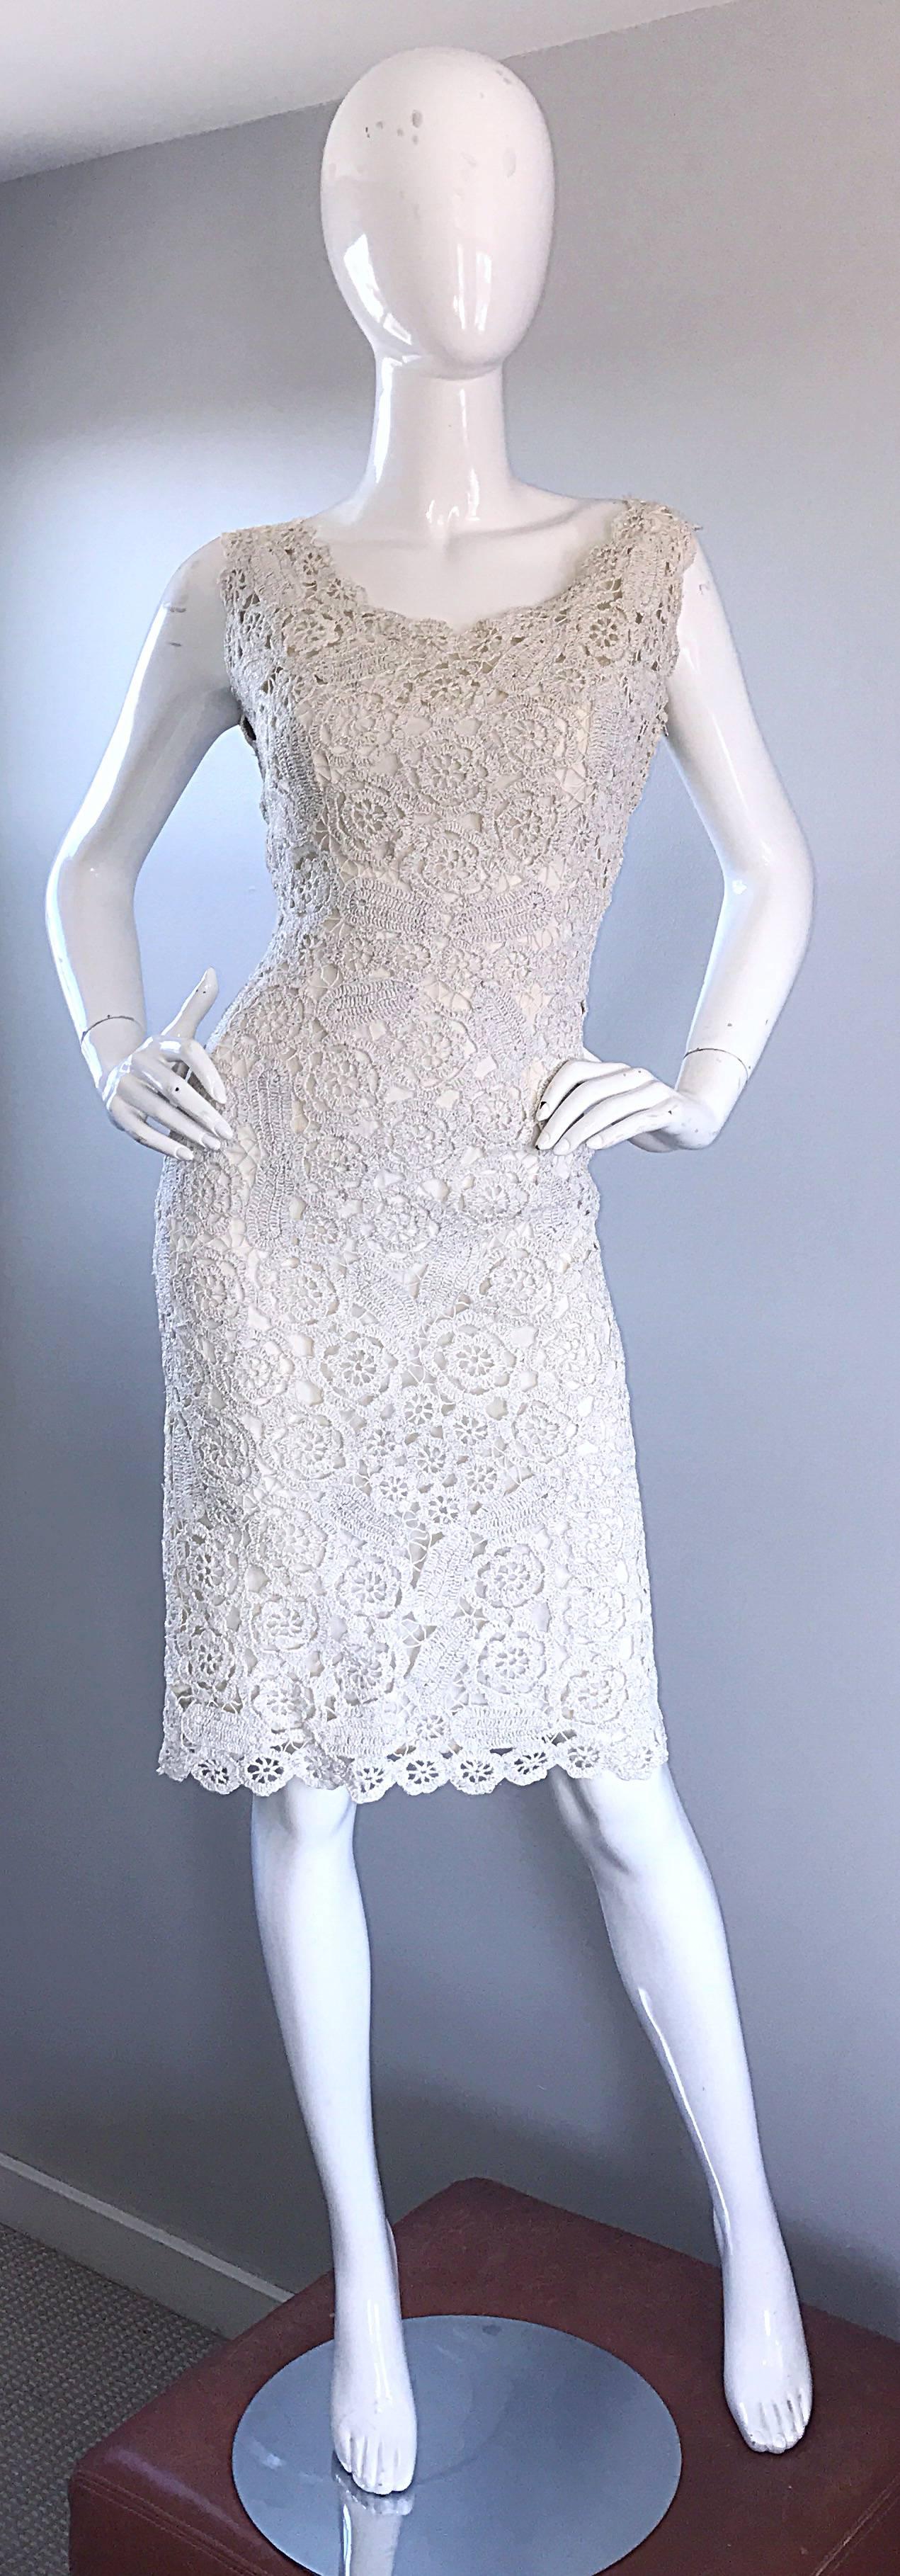 Beautiful 1950s demi couture white and silver raffia wiggle dress! Features white raffia with silver metallic threading throughout. Fabulous bombshell fit looks amazing on! Scalloped edges on the sleeves and skirt. Fully lined. Full metal zipper up